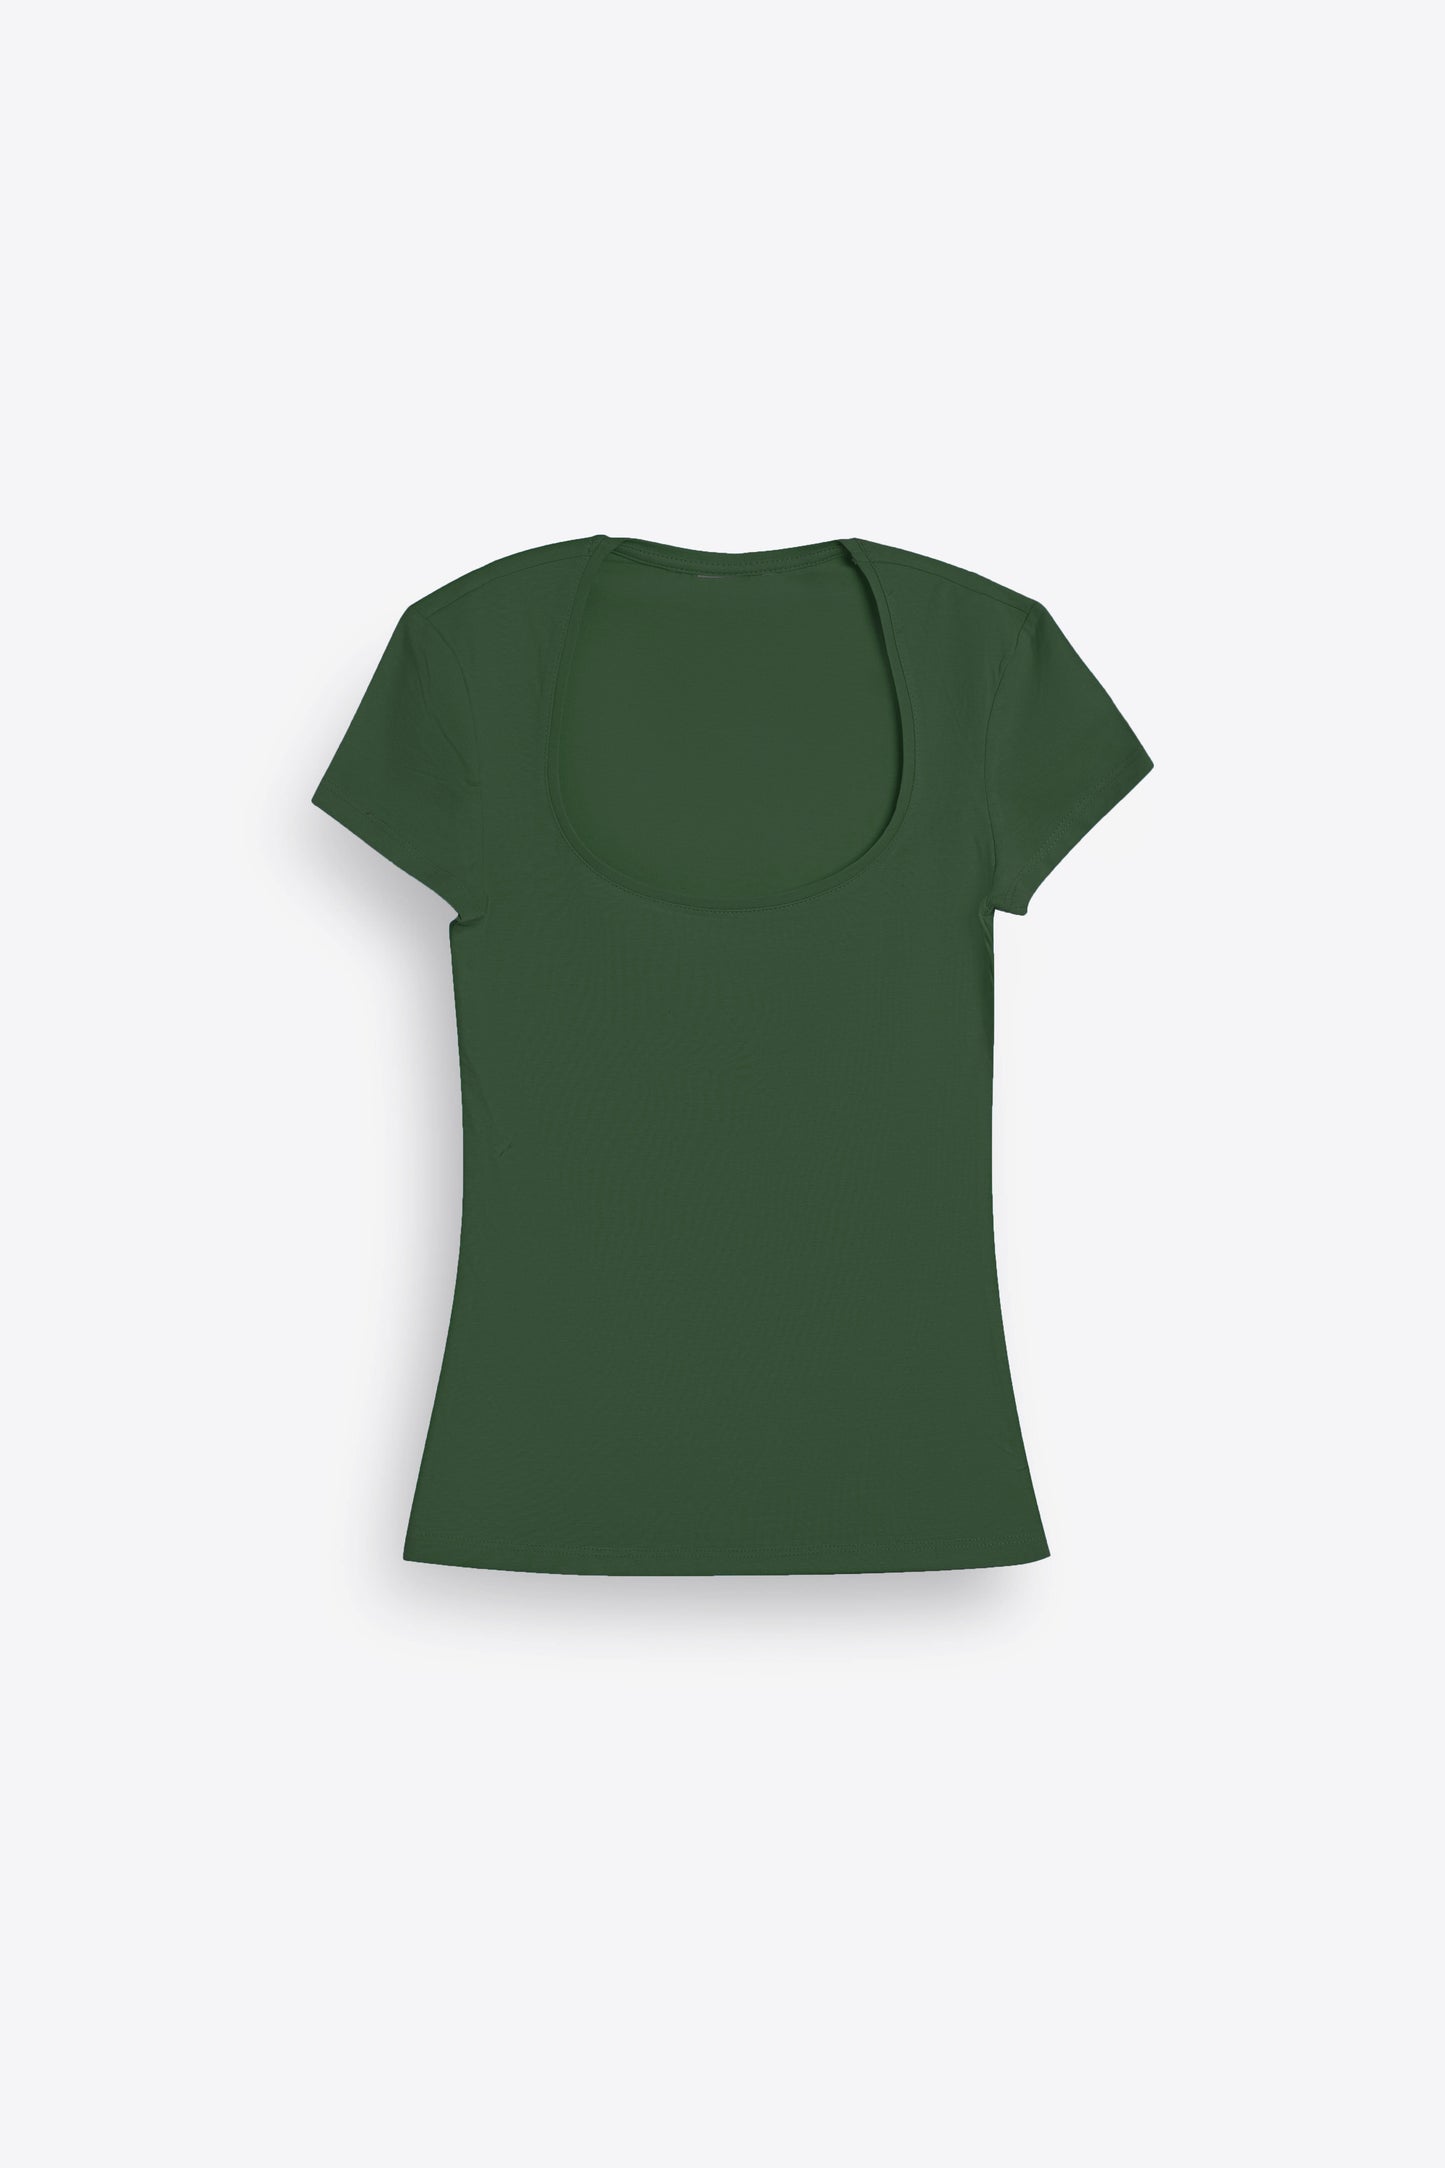 Scoop Neck T-shirt in Forest Green